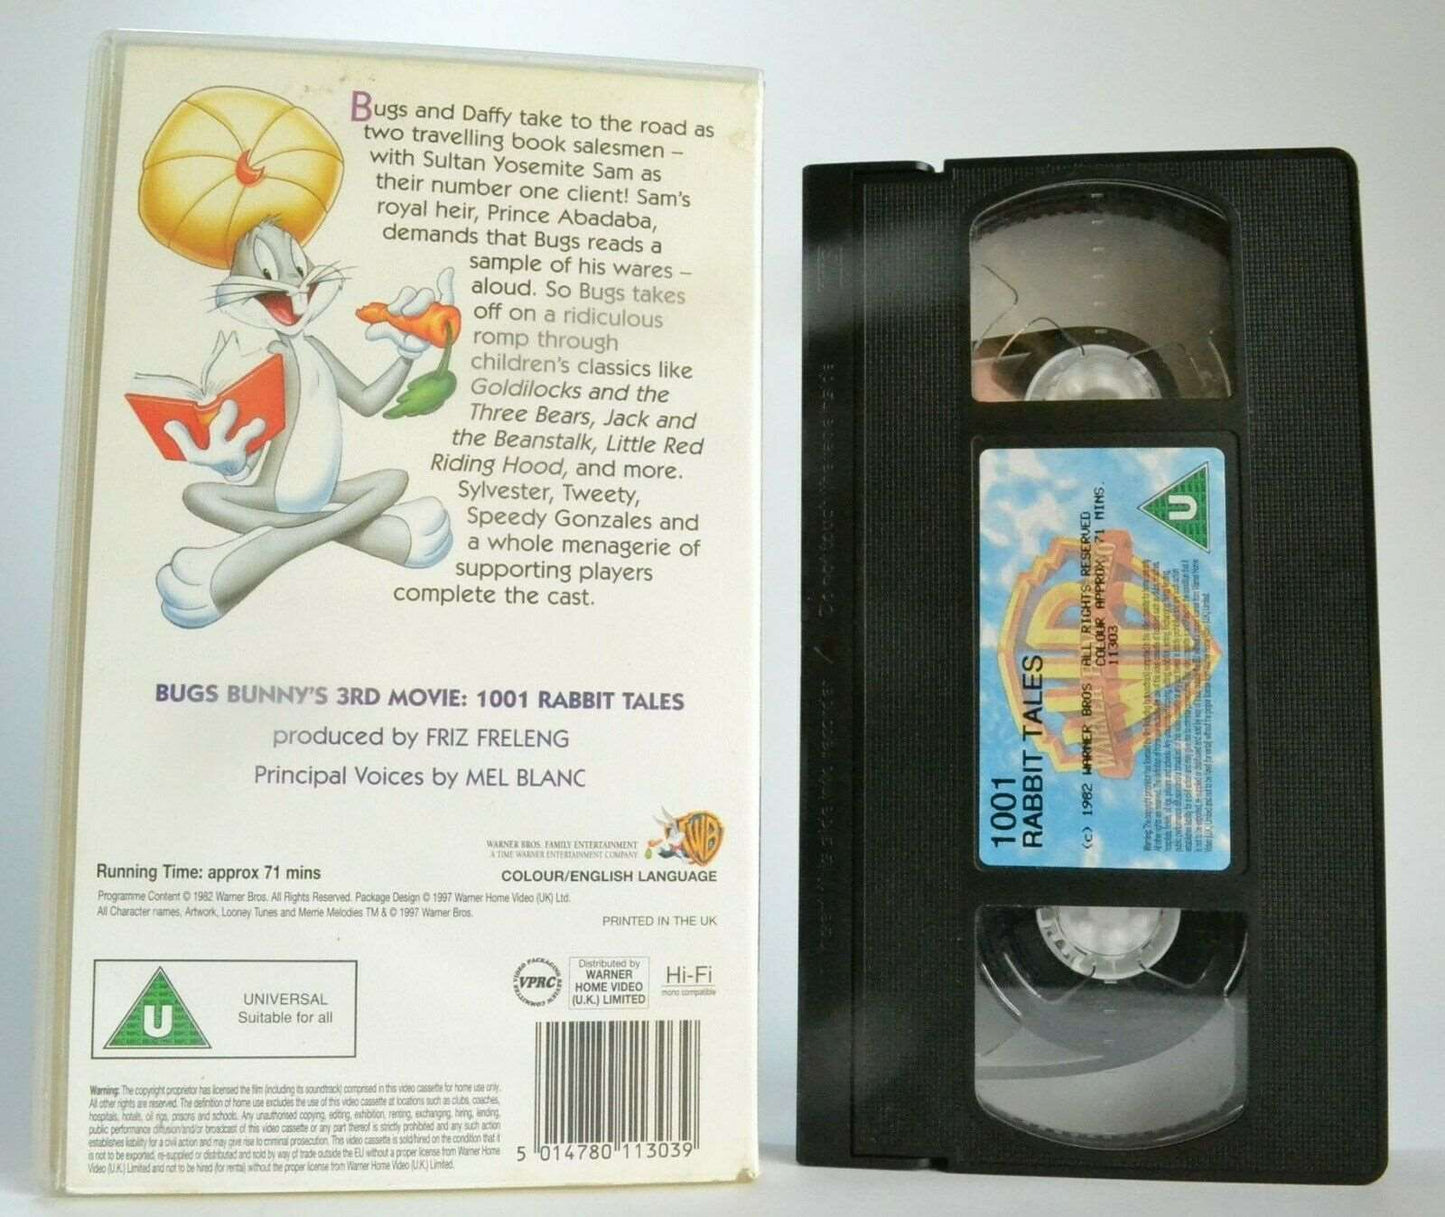 1001 Rabbit Tales [Bugs Bunny 3rd Movie] Looney Tunes - Animated - Kids - VHS-